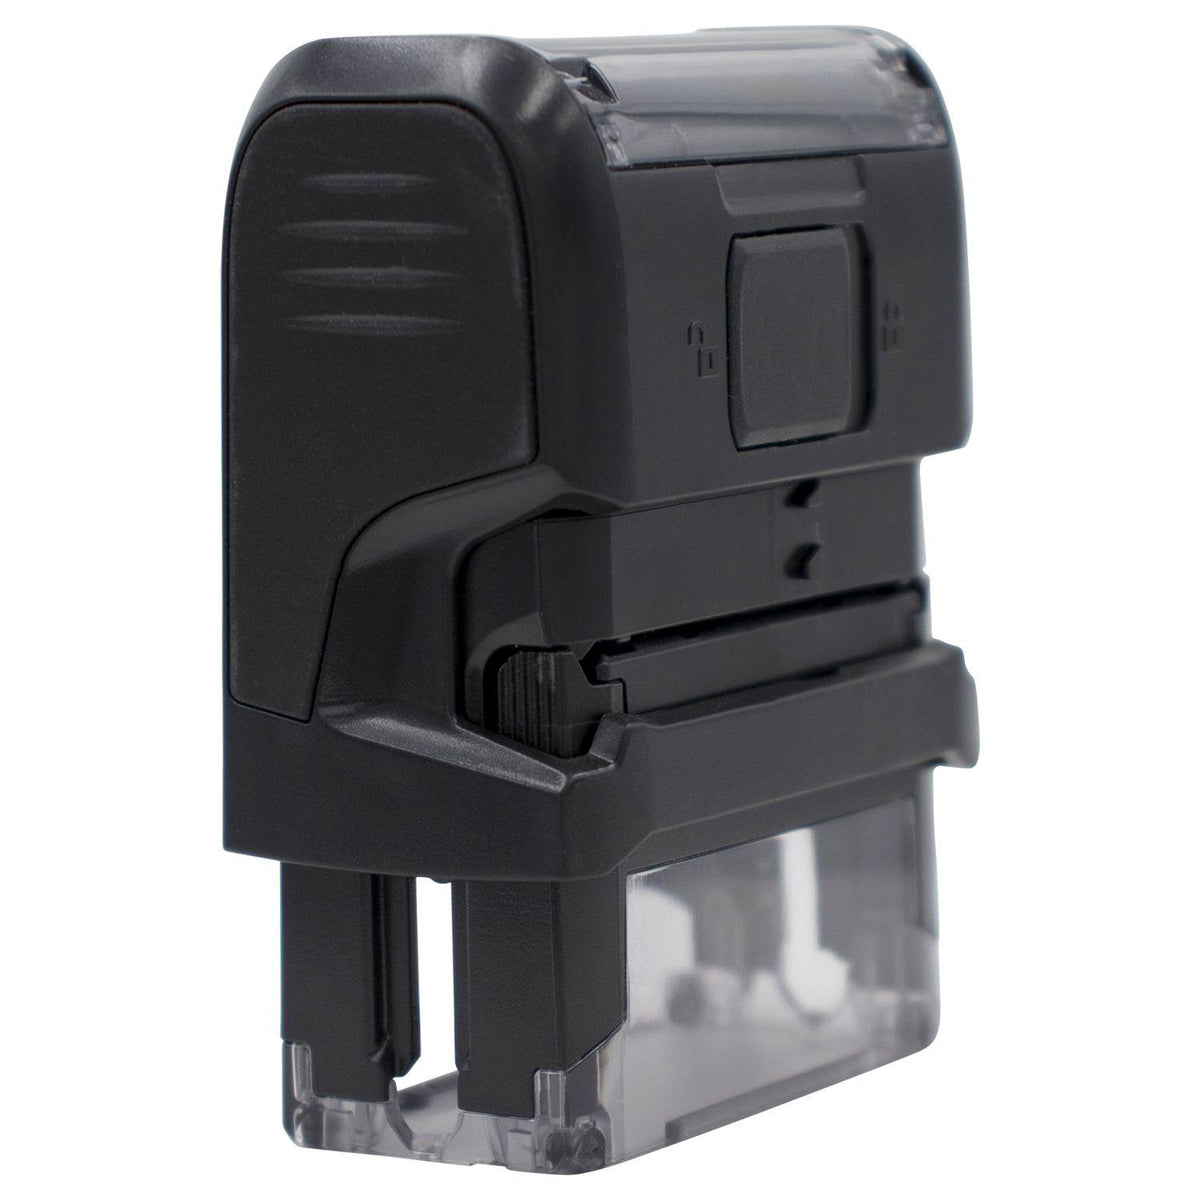 Large Self-Inking Unclassified Stamp - Engineer Seal Stamps - Brand_Trodat, Impression Size_Large, Stamp Type_Self-Inking Stamp, Type of Use_Business, Type of Use_Office, Type of Use_Professional